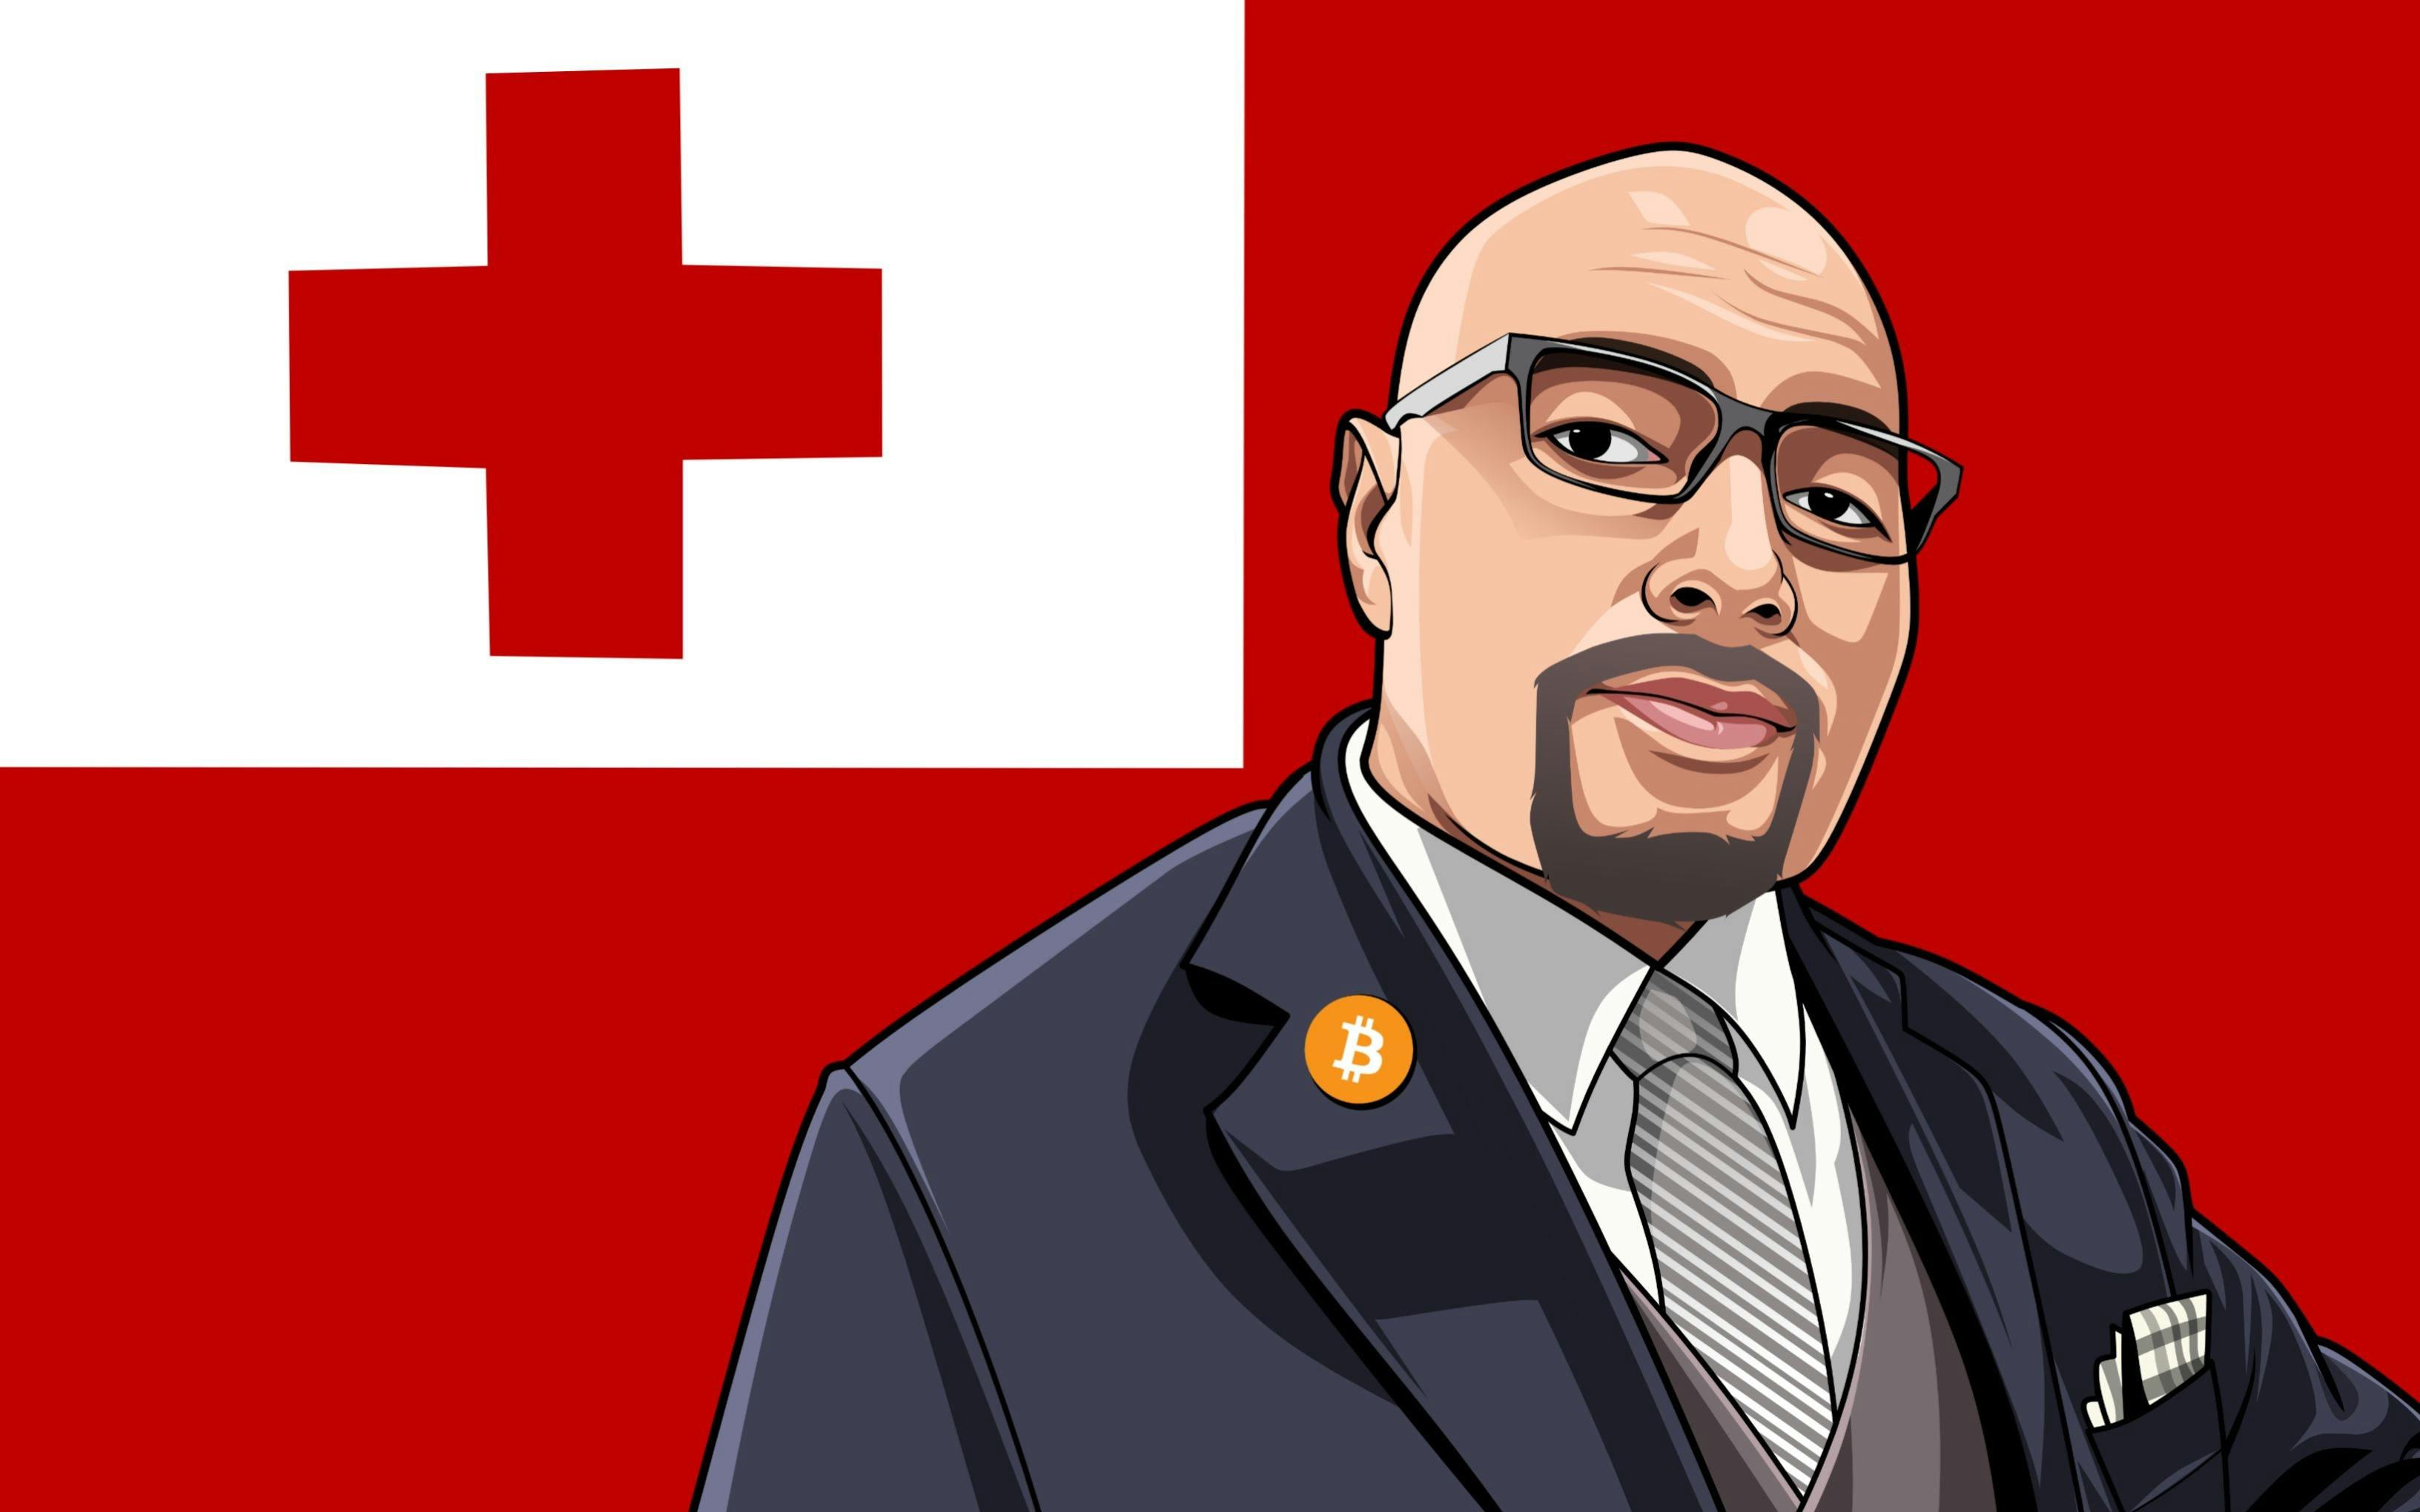 featured image - Q&A on BTC with Tongan Noble: Member of Parliament Lord Fusitu'a